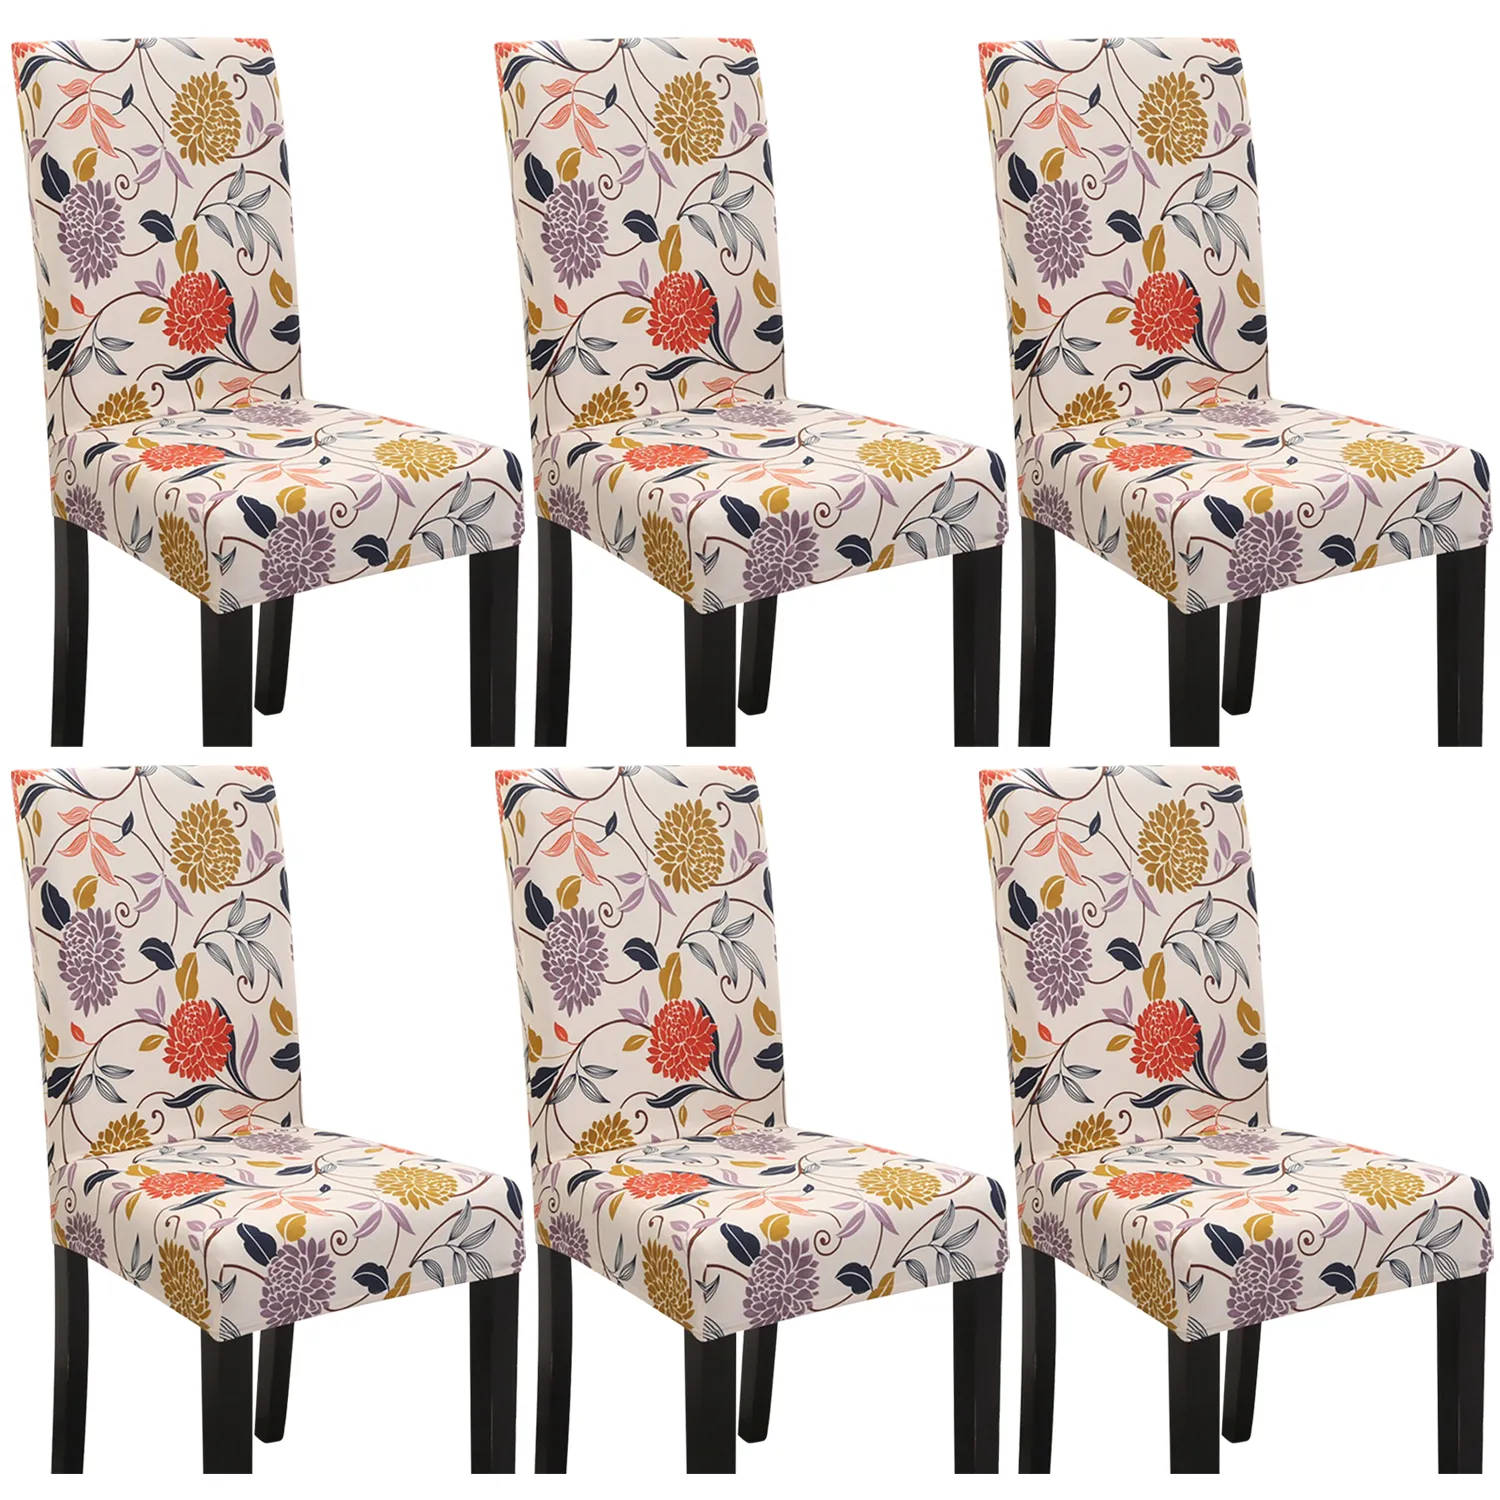 Reador Wholesale Printed Stretch Dining Chair Cover Spandex Elastic Chair Seat Cover For Dining Room